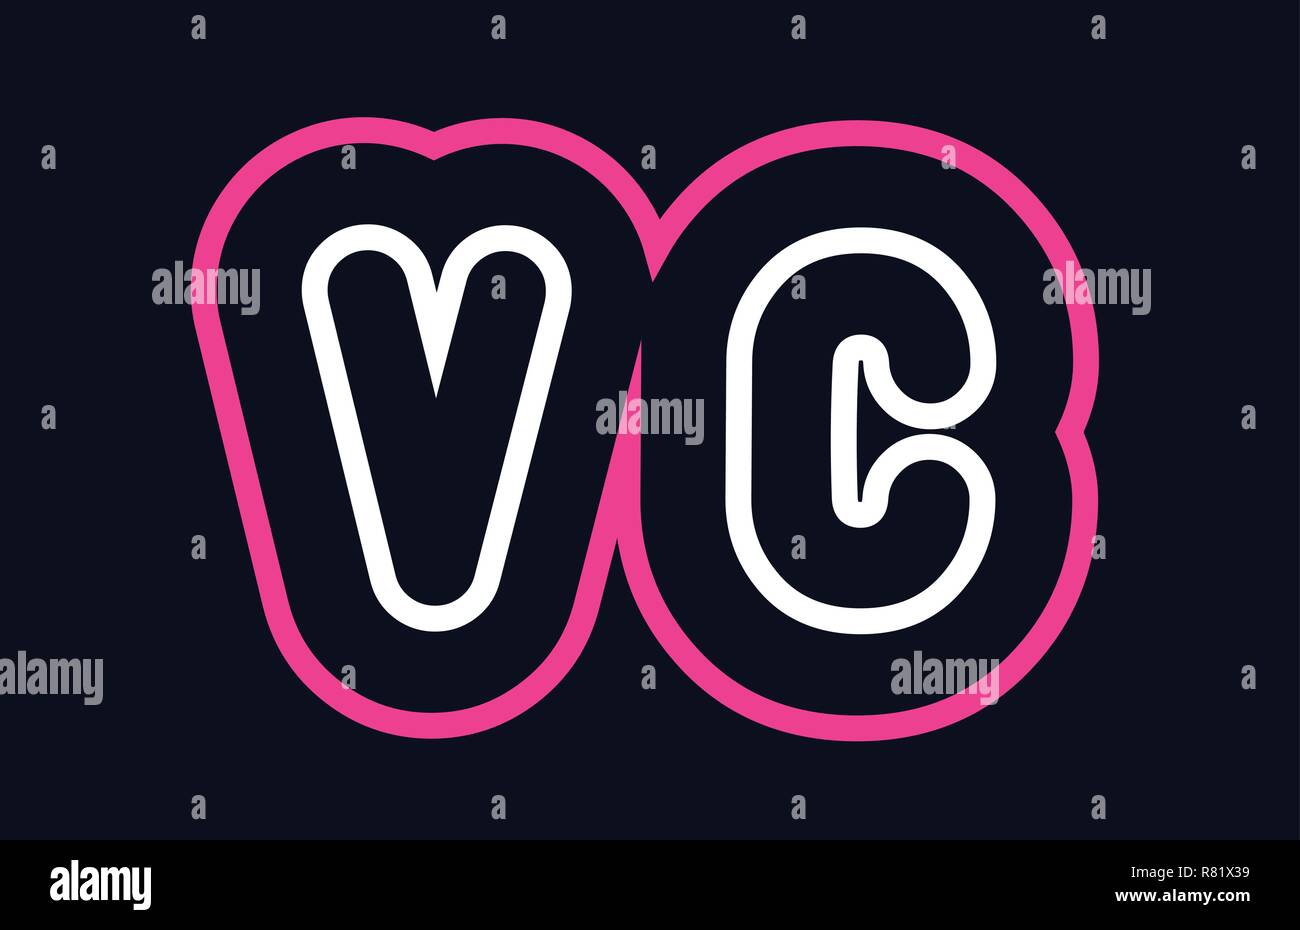 Pink White Blue Alphabet Combination Letter Vc V C Logo Design Suitable For A Company Or Business Stock Vector Image Art Alamy